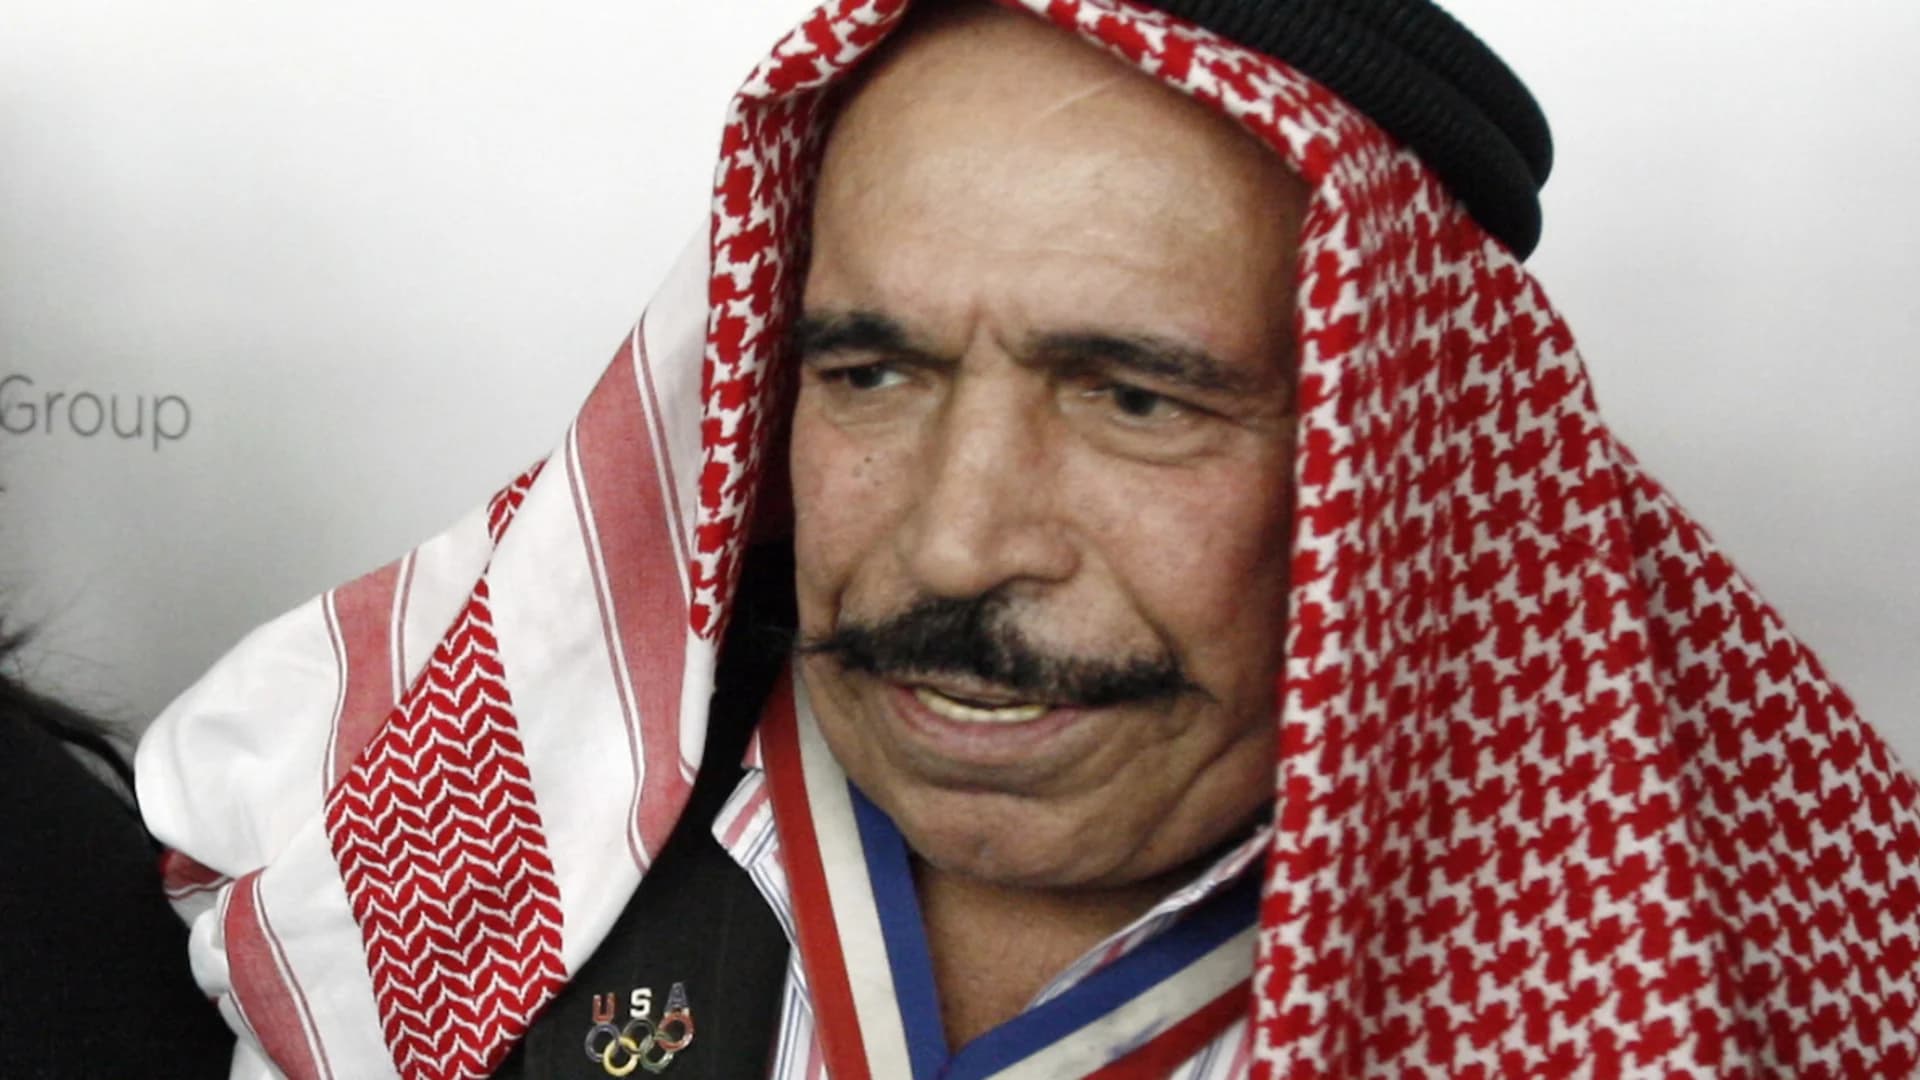 The Iron Sheik, charismatic former pro wrestling villain and Twitter personality, dies at 81